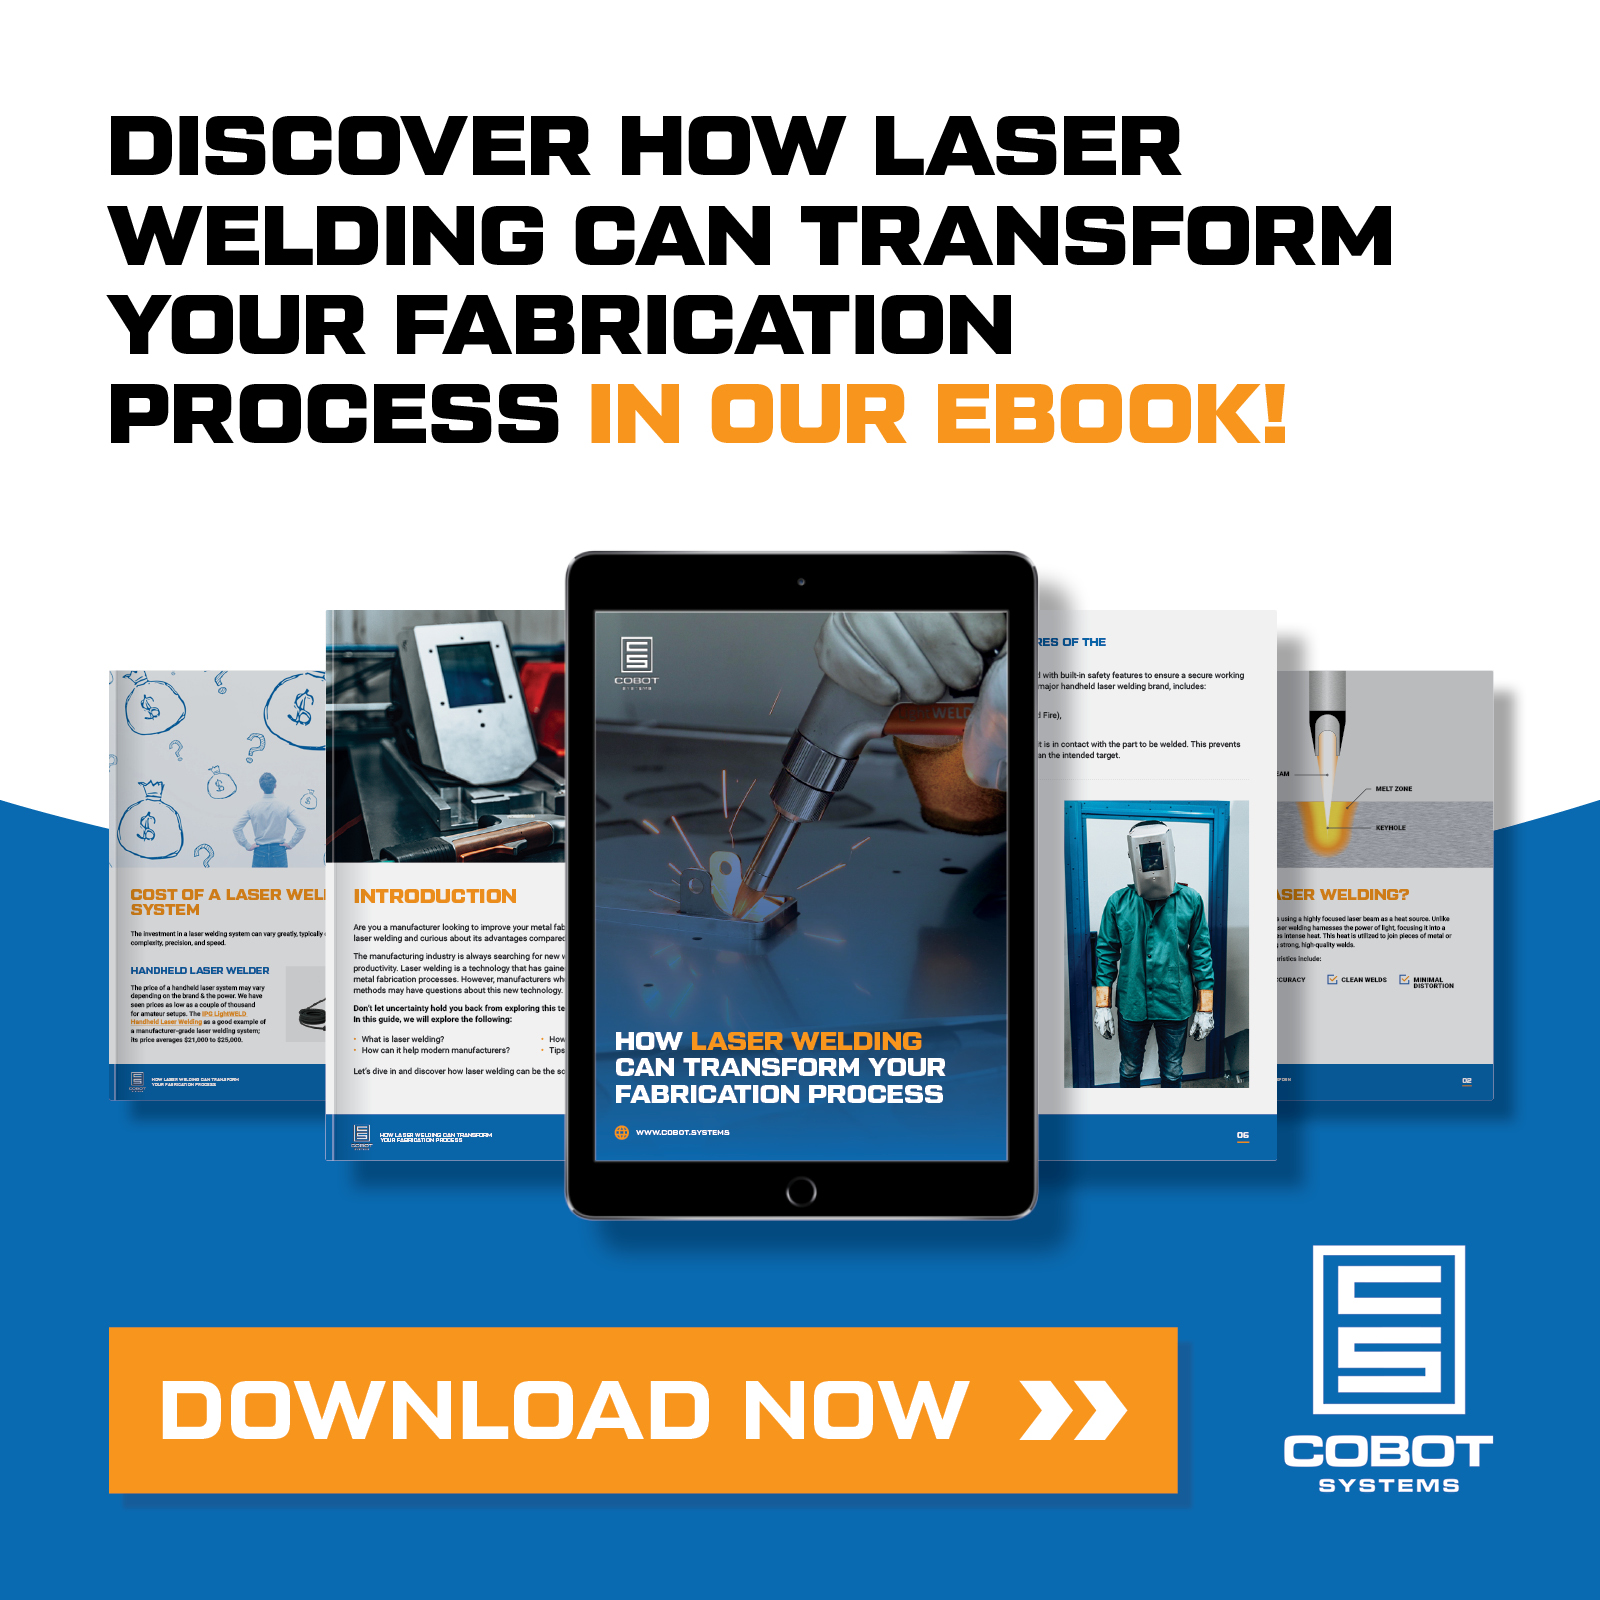 How Laser Welding Can Transform Your Fabrication Process eBook